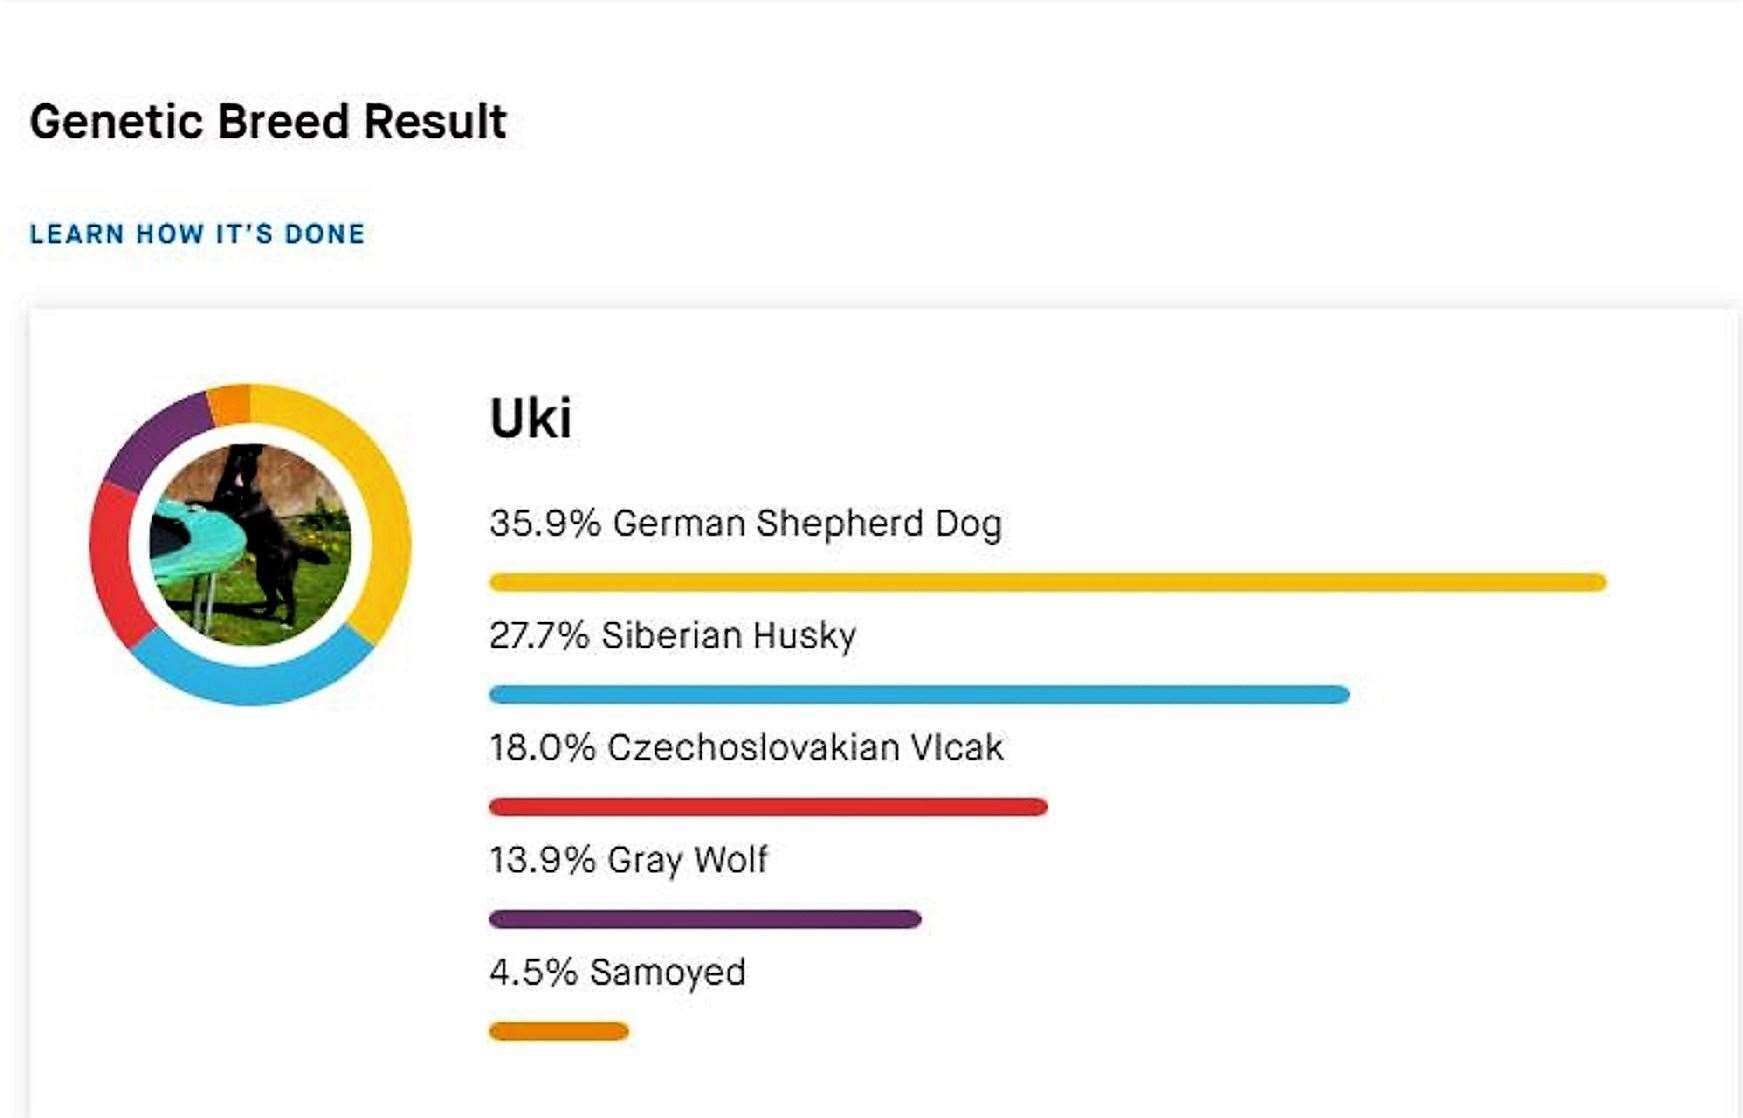 Uki's DNA test results show 18% Czechoslovakian Vlcak, which contains wolf genes, and 13.9% Gray Wolf.  Lynn says testing company Embark says this gives an overall score of 18% for the wolf.